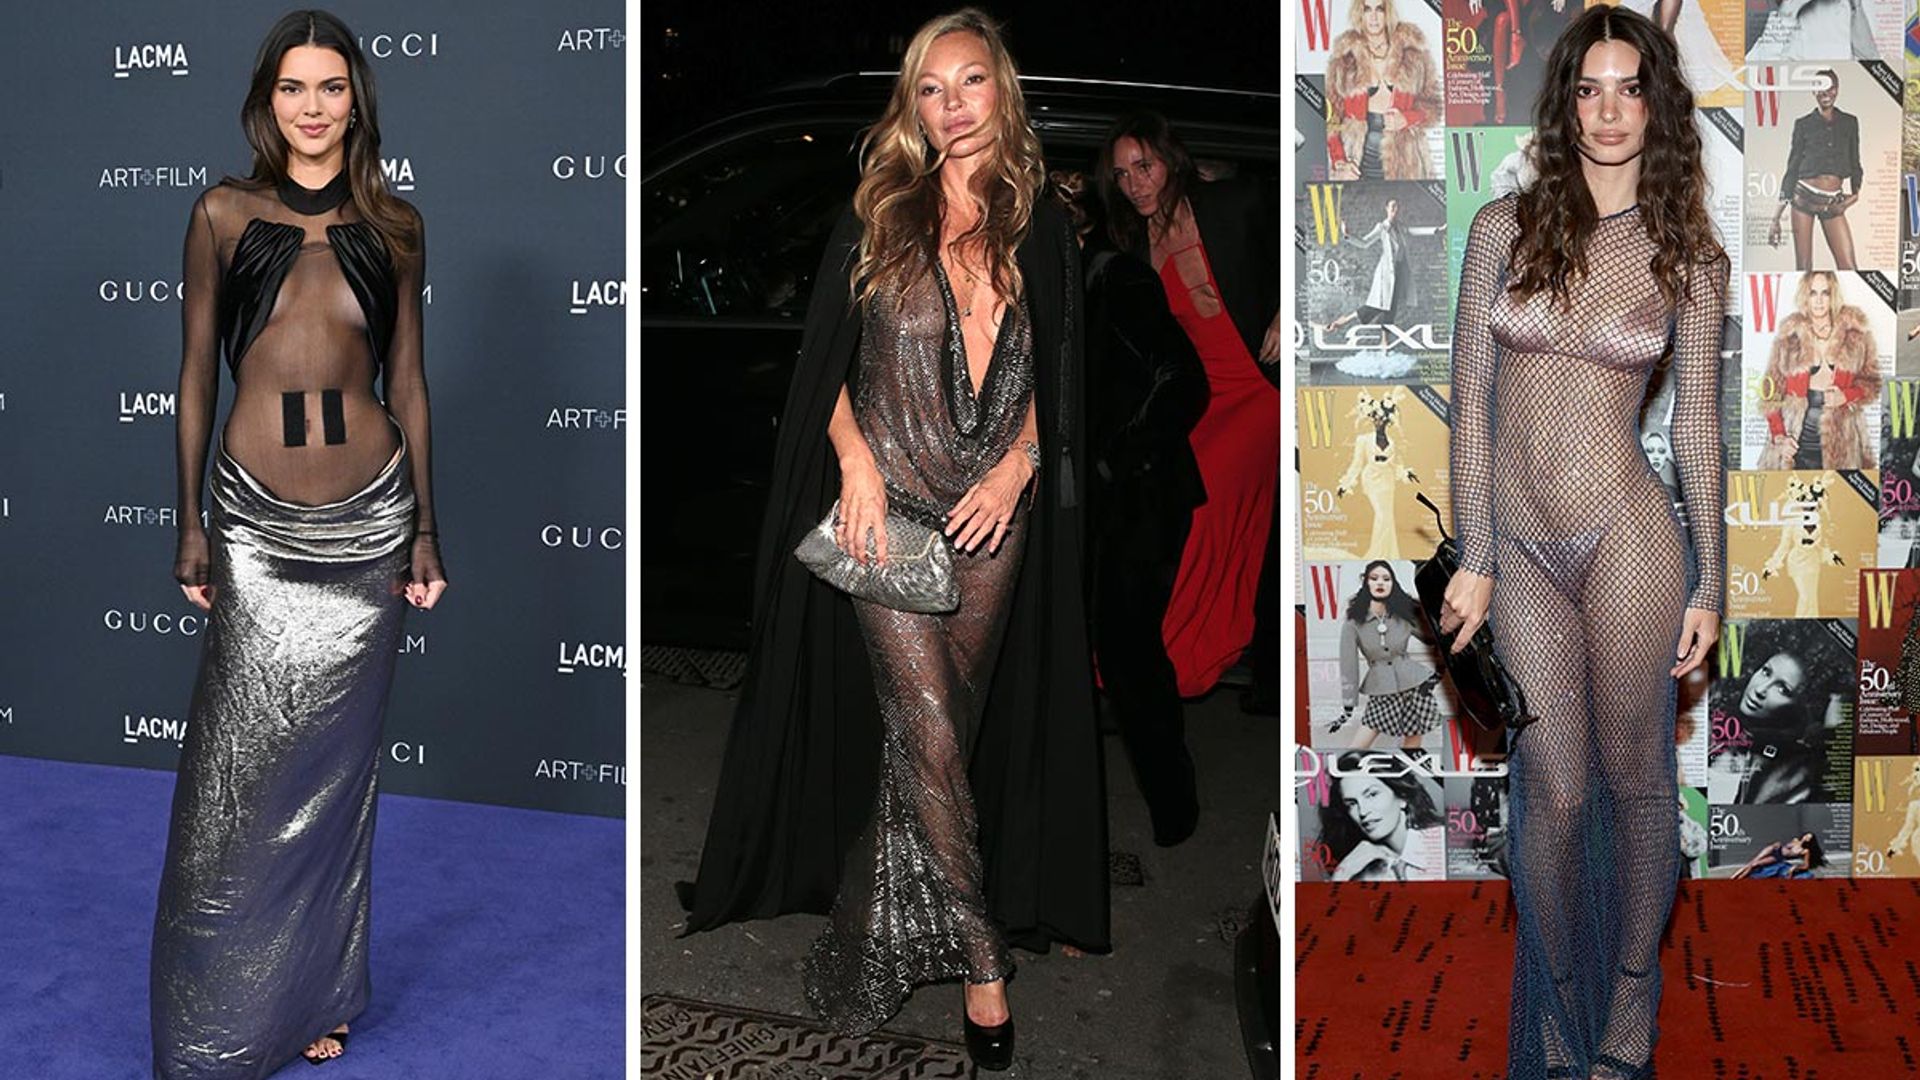 Return of the naked dress: Sheer fashion is back on red carpets, runways